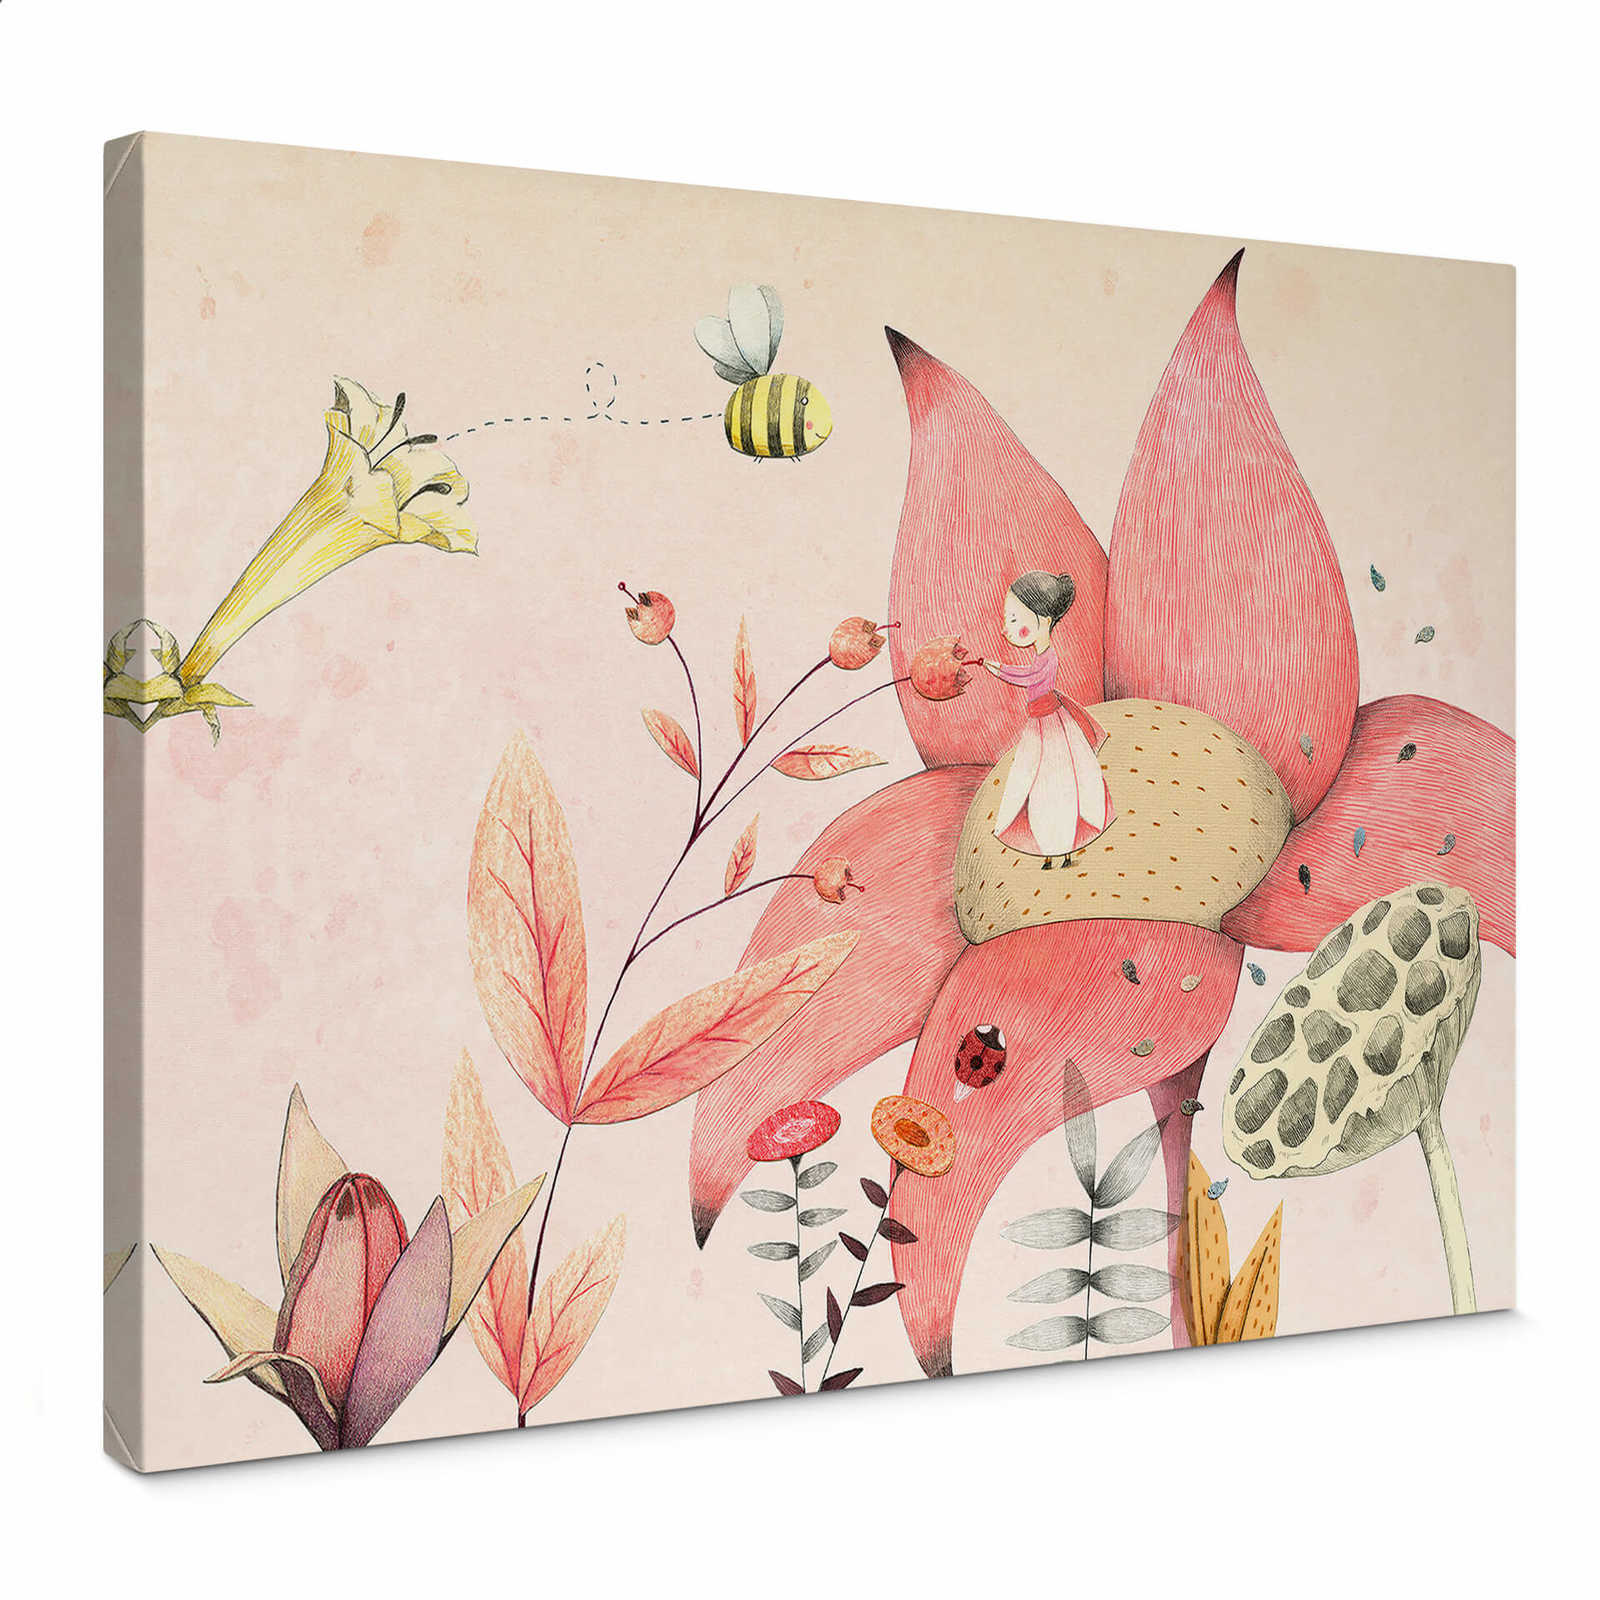 Children's canvas print "Thumbelina" by Loske
